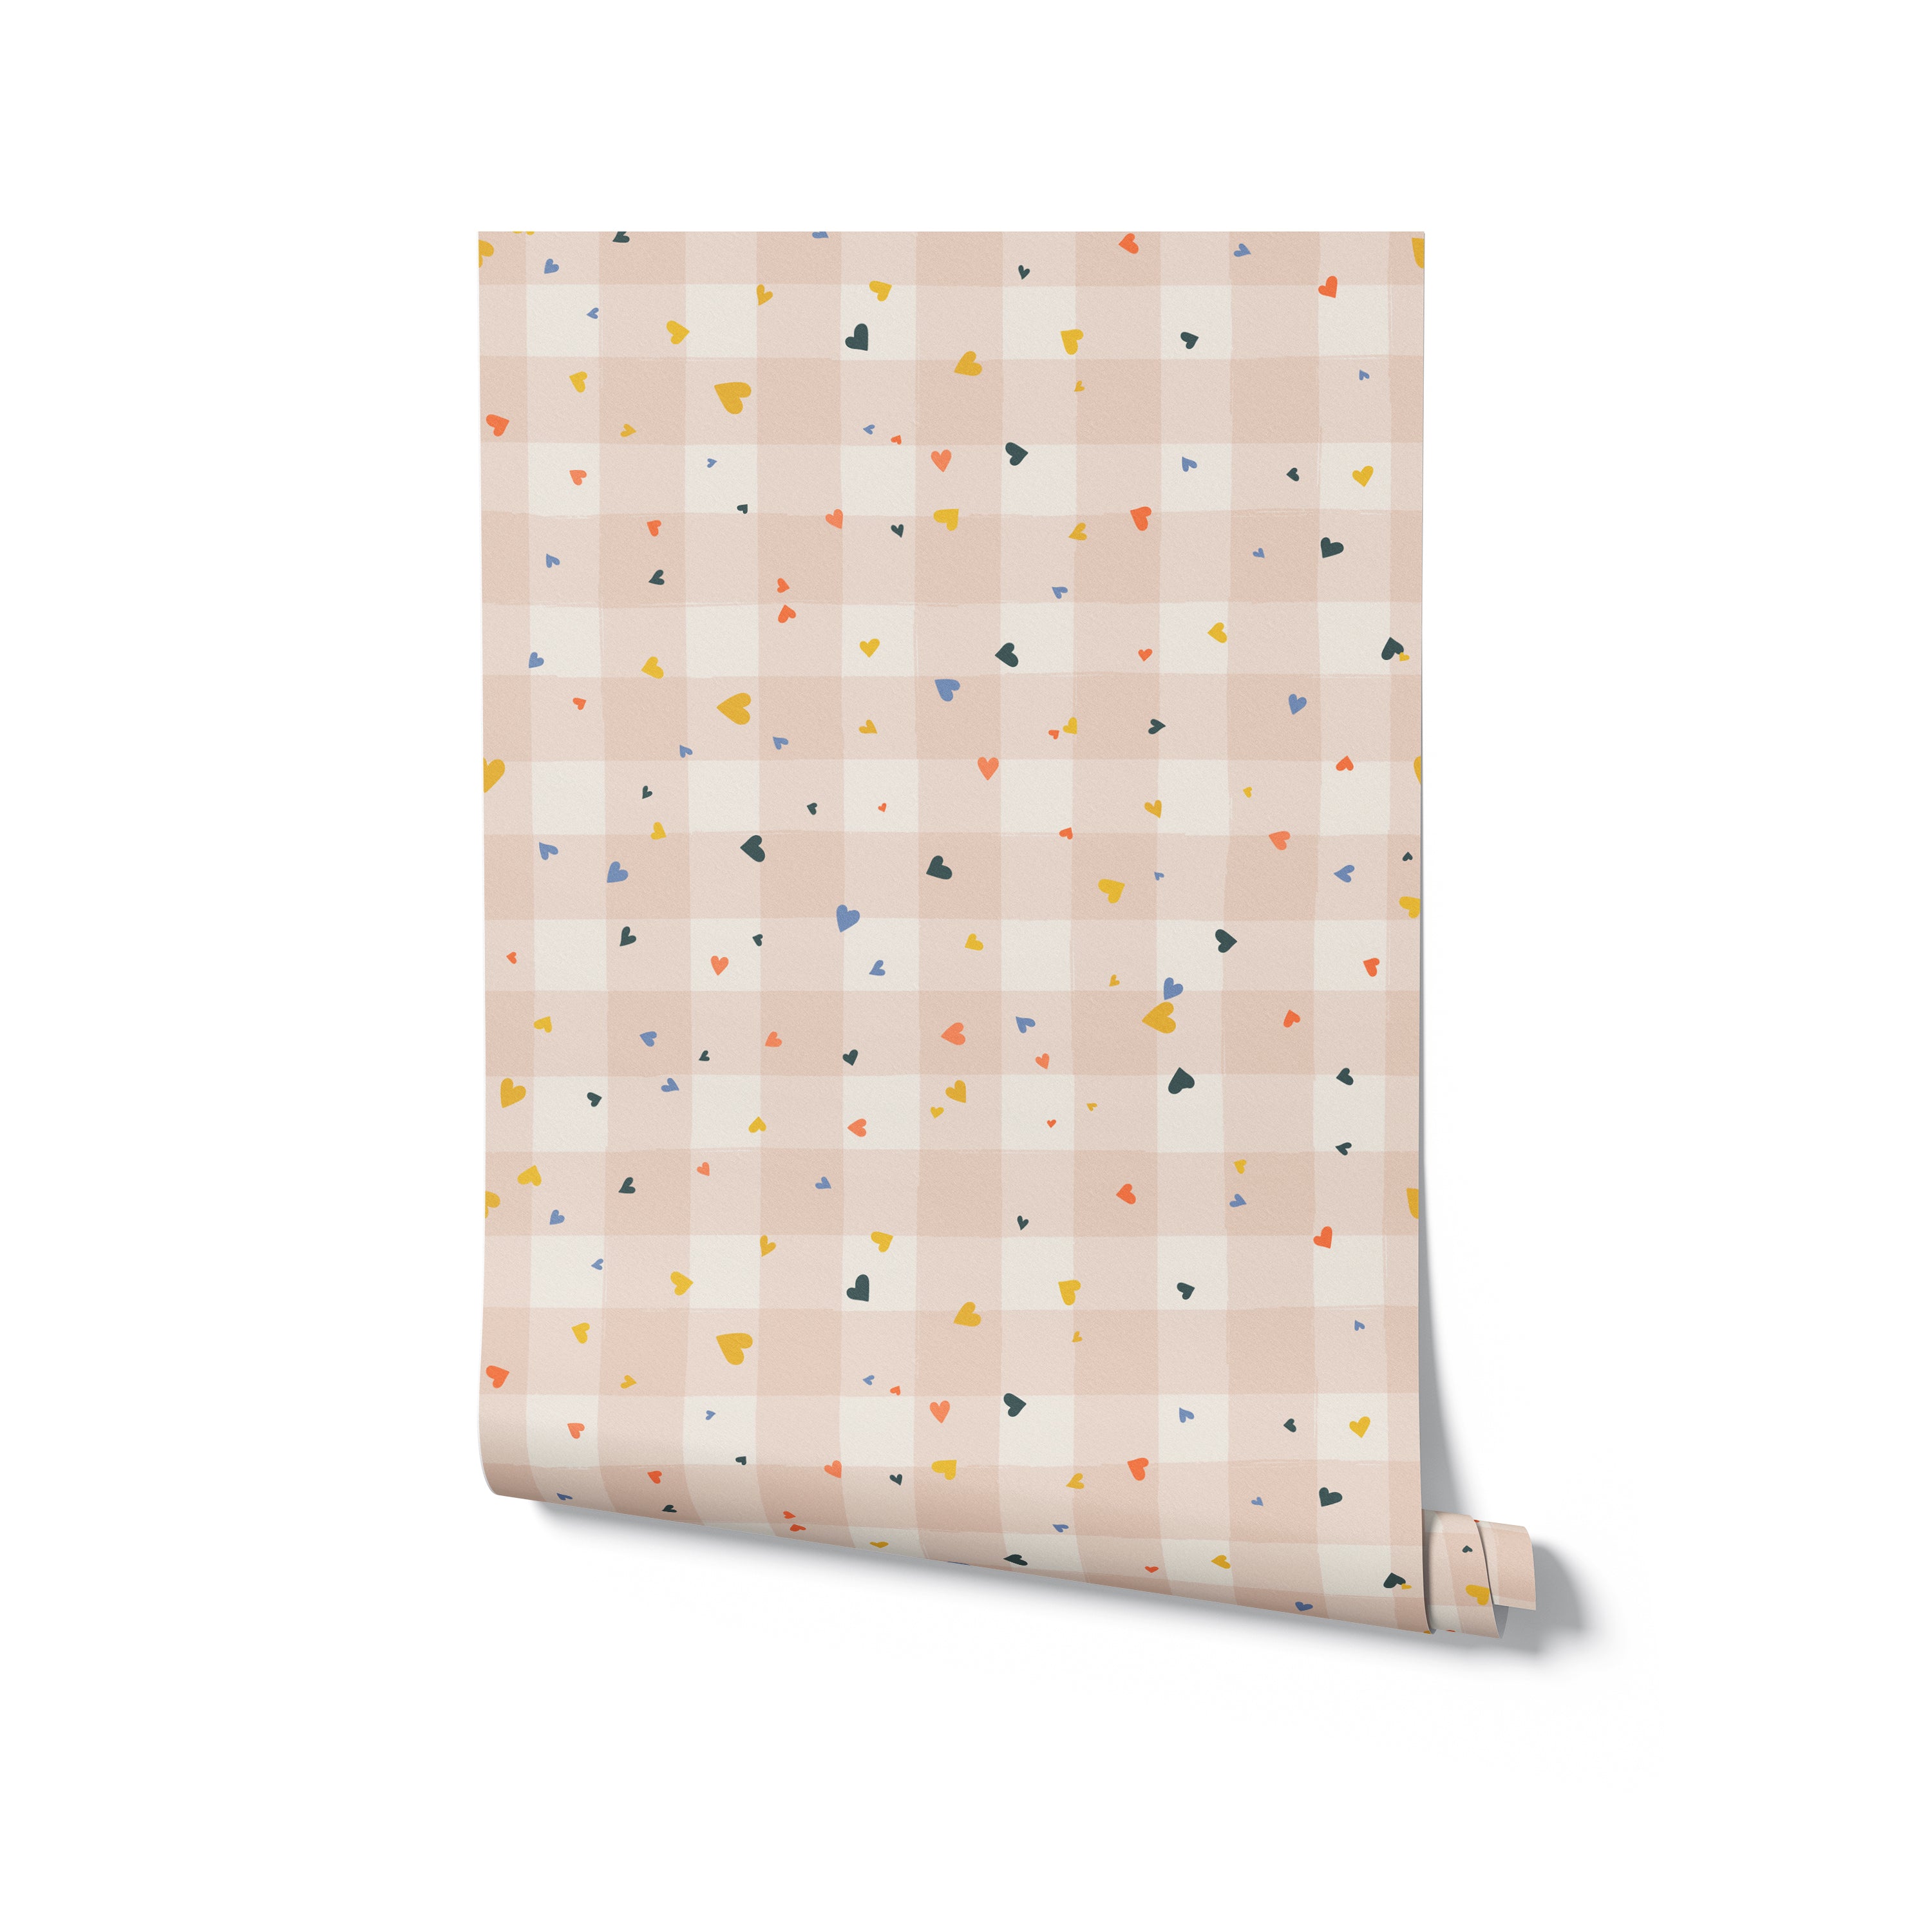 A rolled wallpaper with a playful geometric pattern of tiny triangles in yellow, orange, navy blue, and black on a soft pink background.